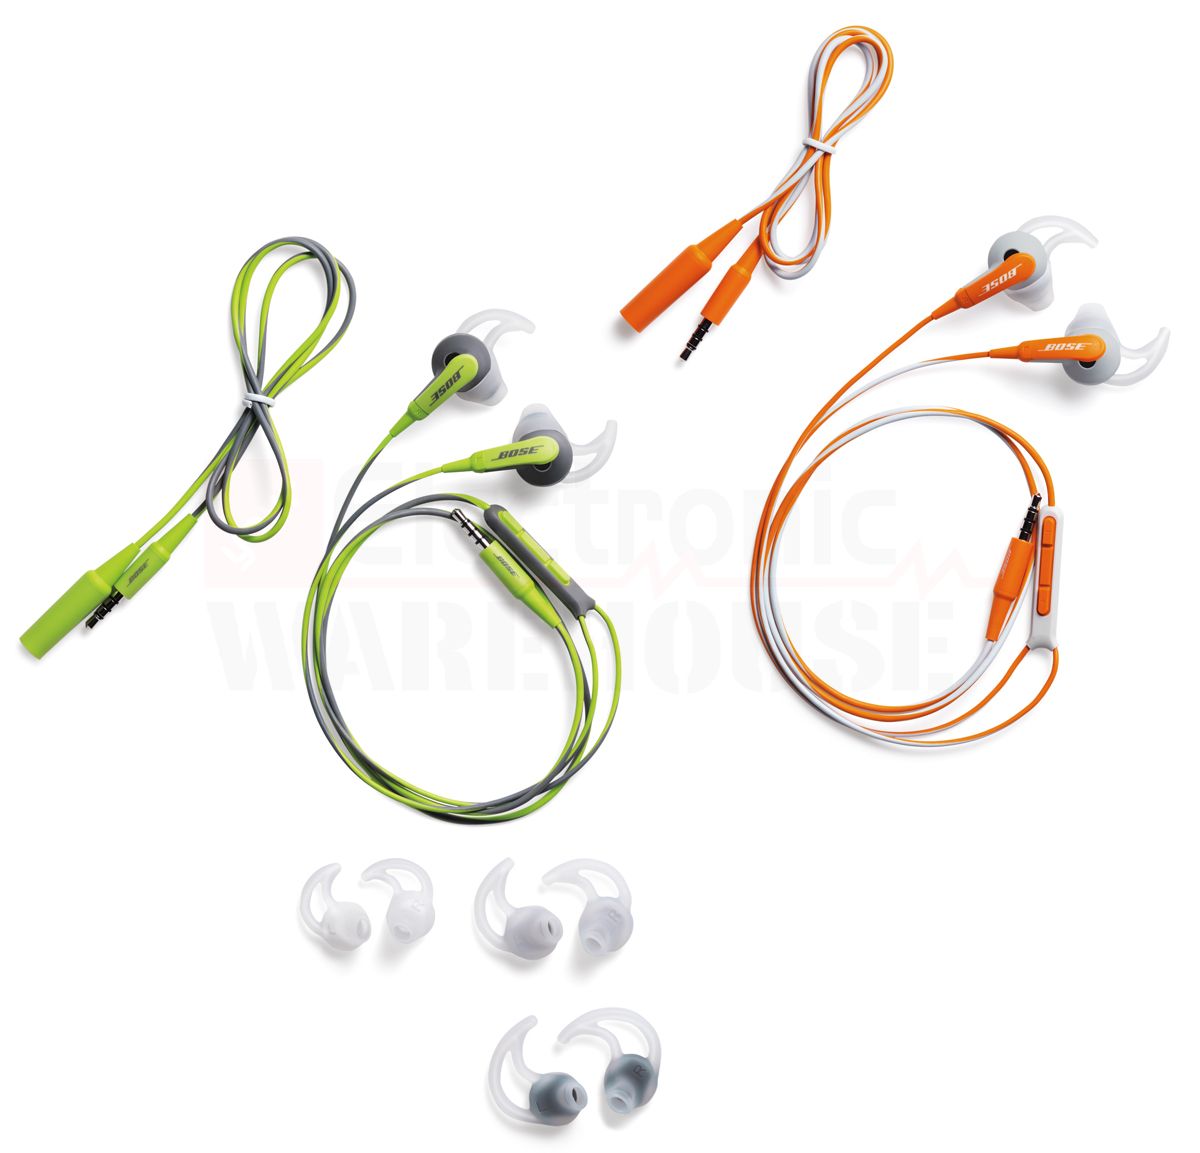 Review of Bose SIE2 and SIE2i Sport Headphones